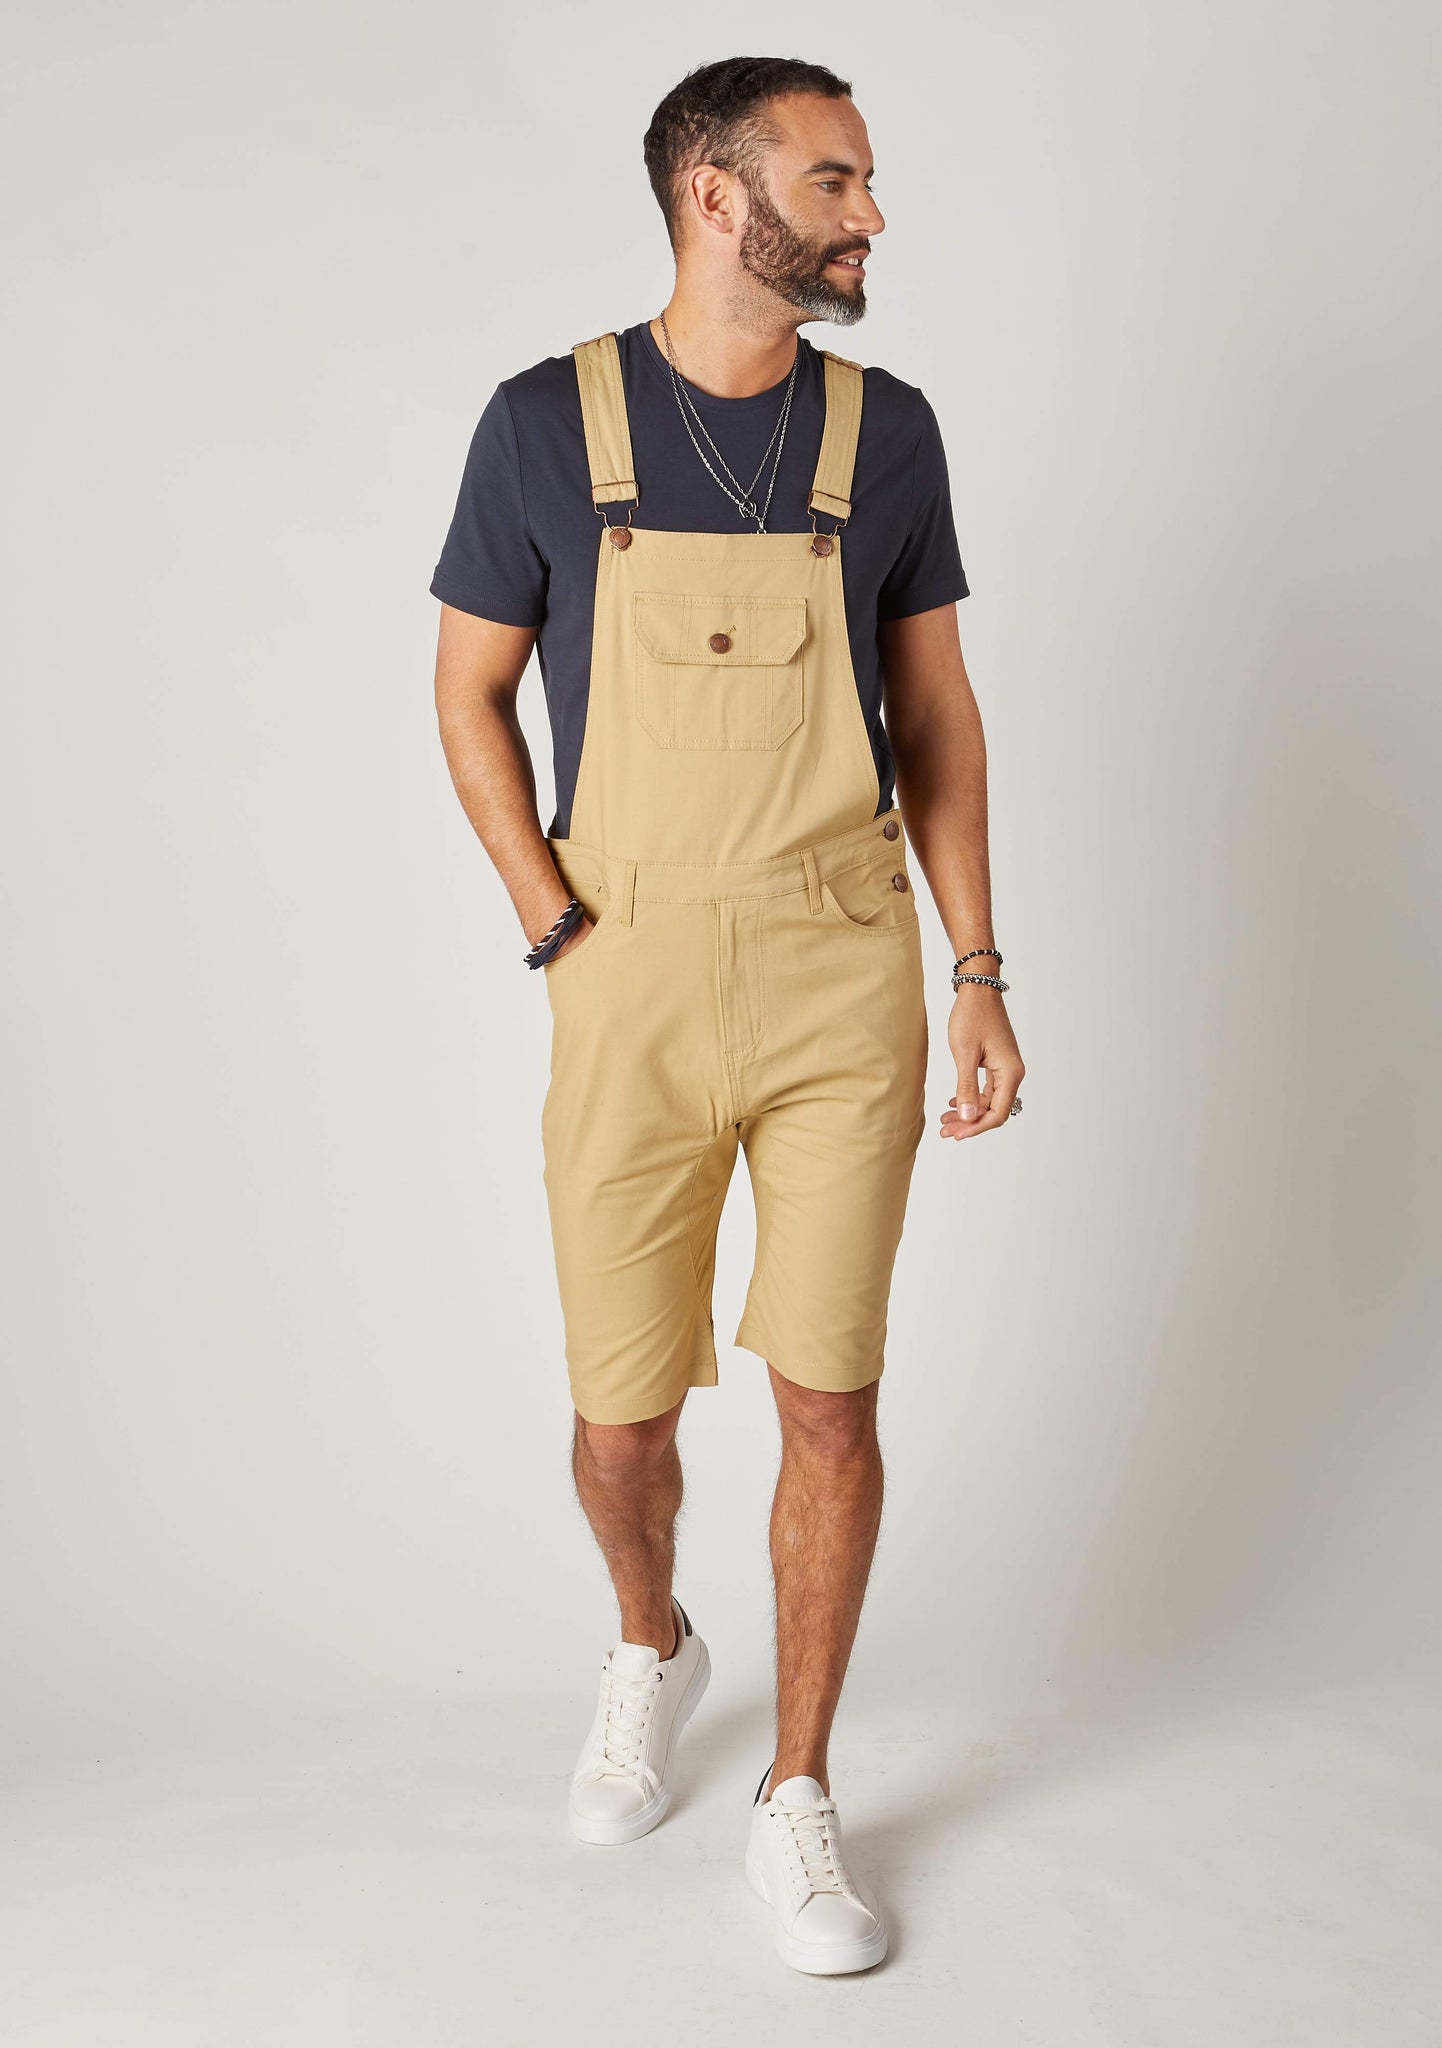 Full frontal walking pose wearing slim-fit, sand-coloured cotton bib-overall shorts from Dungarees Online. Hand in front-tight pocket with clear view of adjustable straps and large bib pocket.